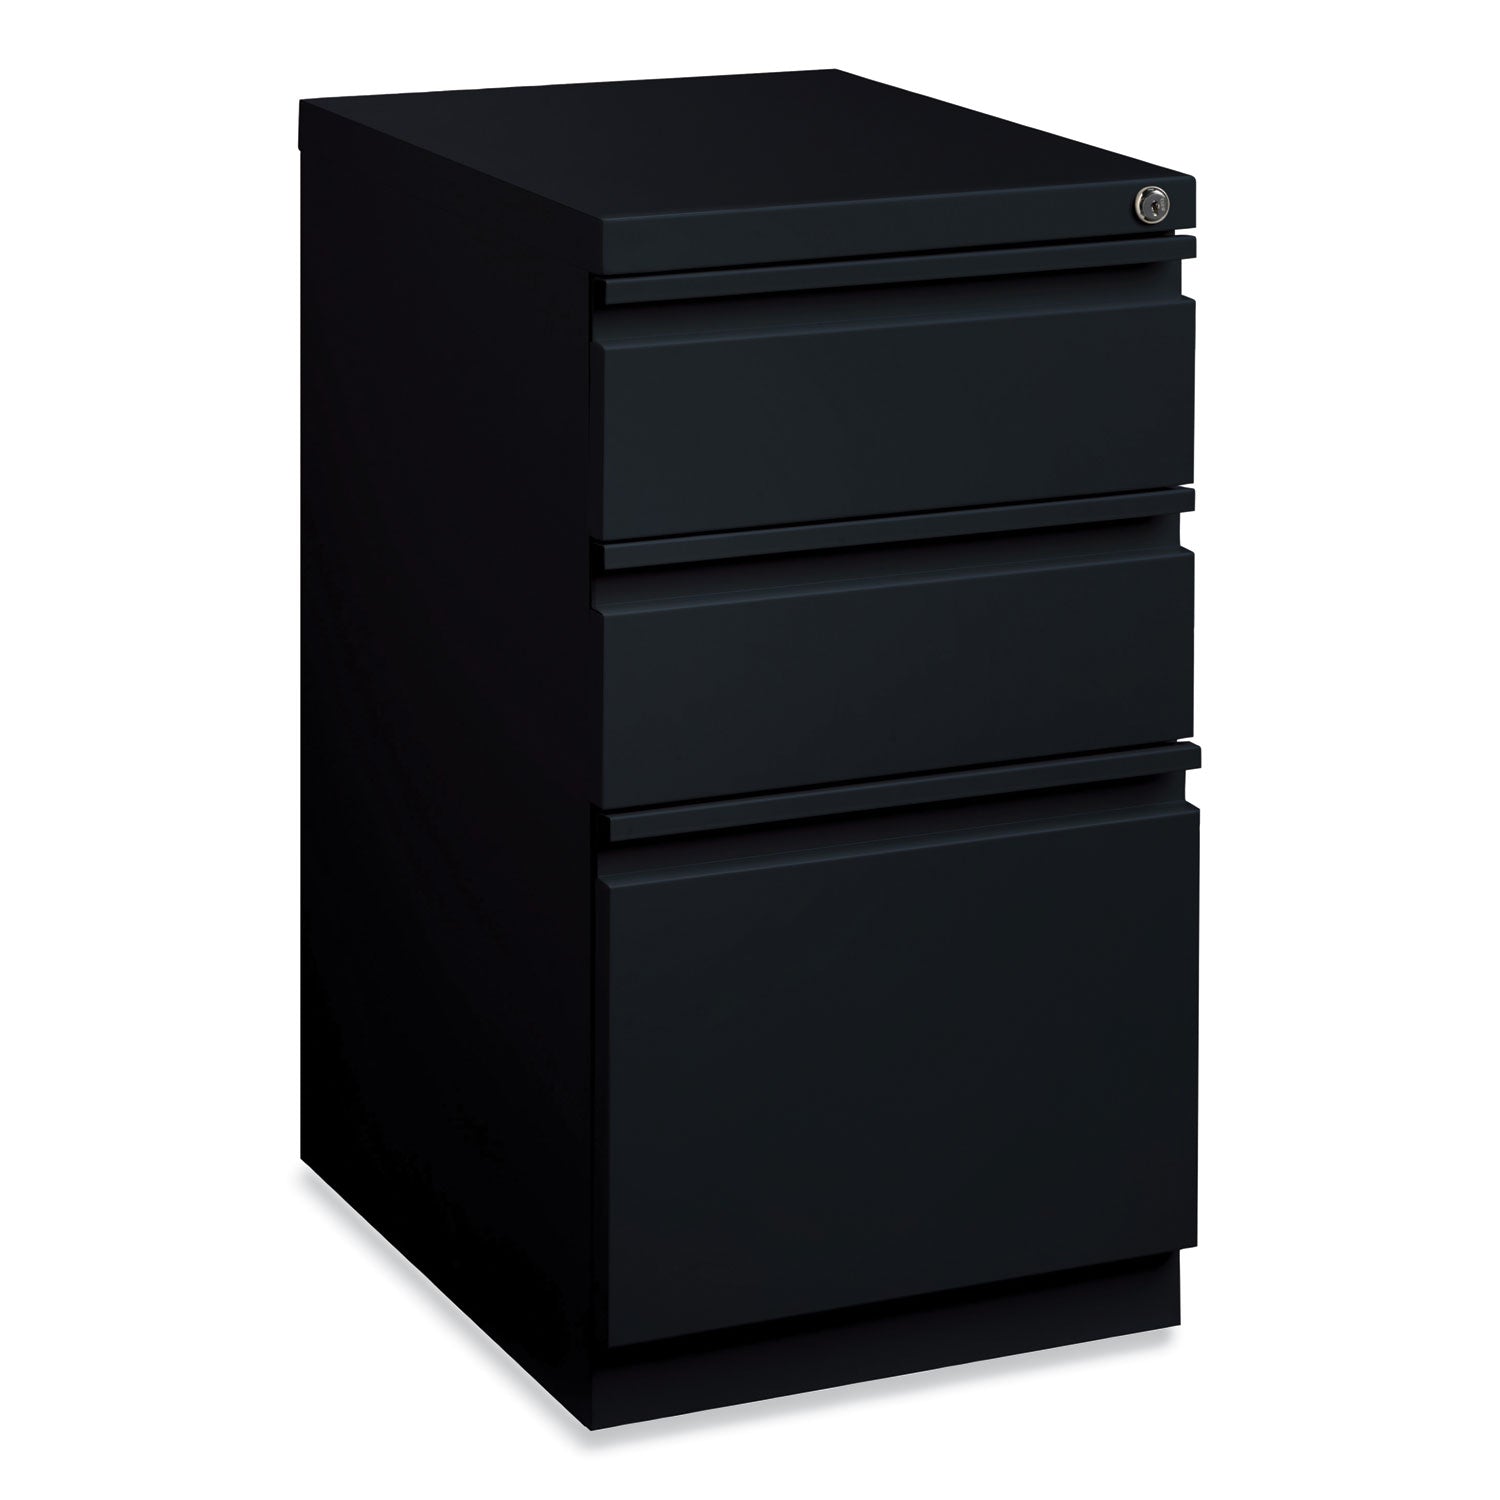 full-width-pull-20-deep-mobile-pedestal-file-box-box-file-letter-black-15-x-1988-x-2775-ships-in-4-6-business-days_hid18575 - 3